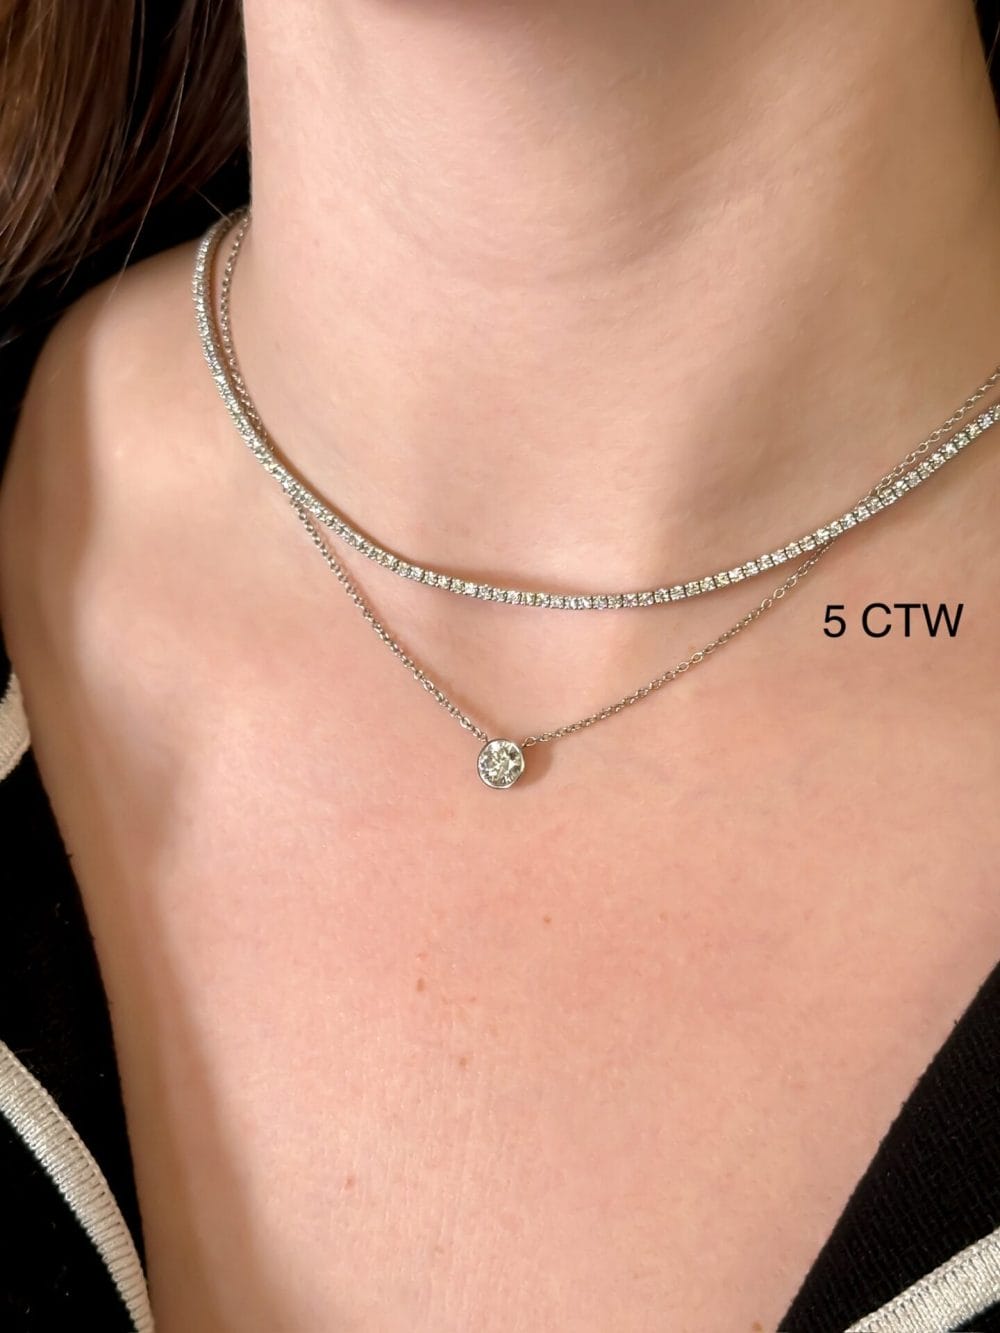 5 CTW Tennis necklace layered Verstolo